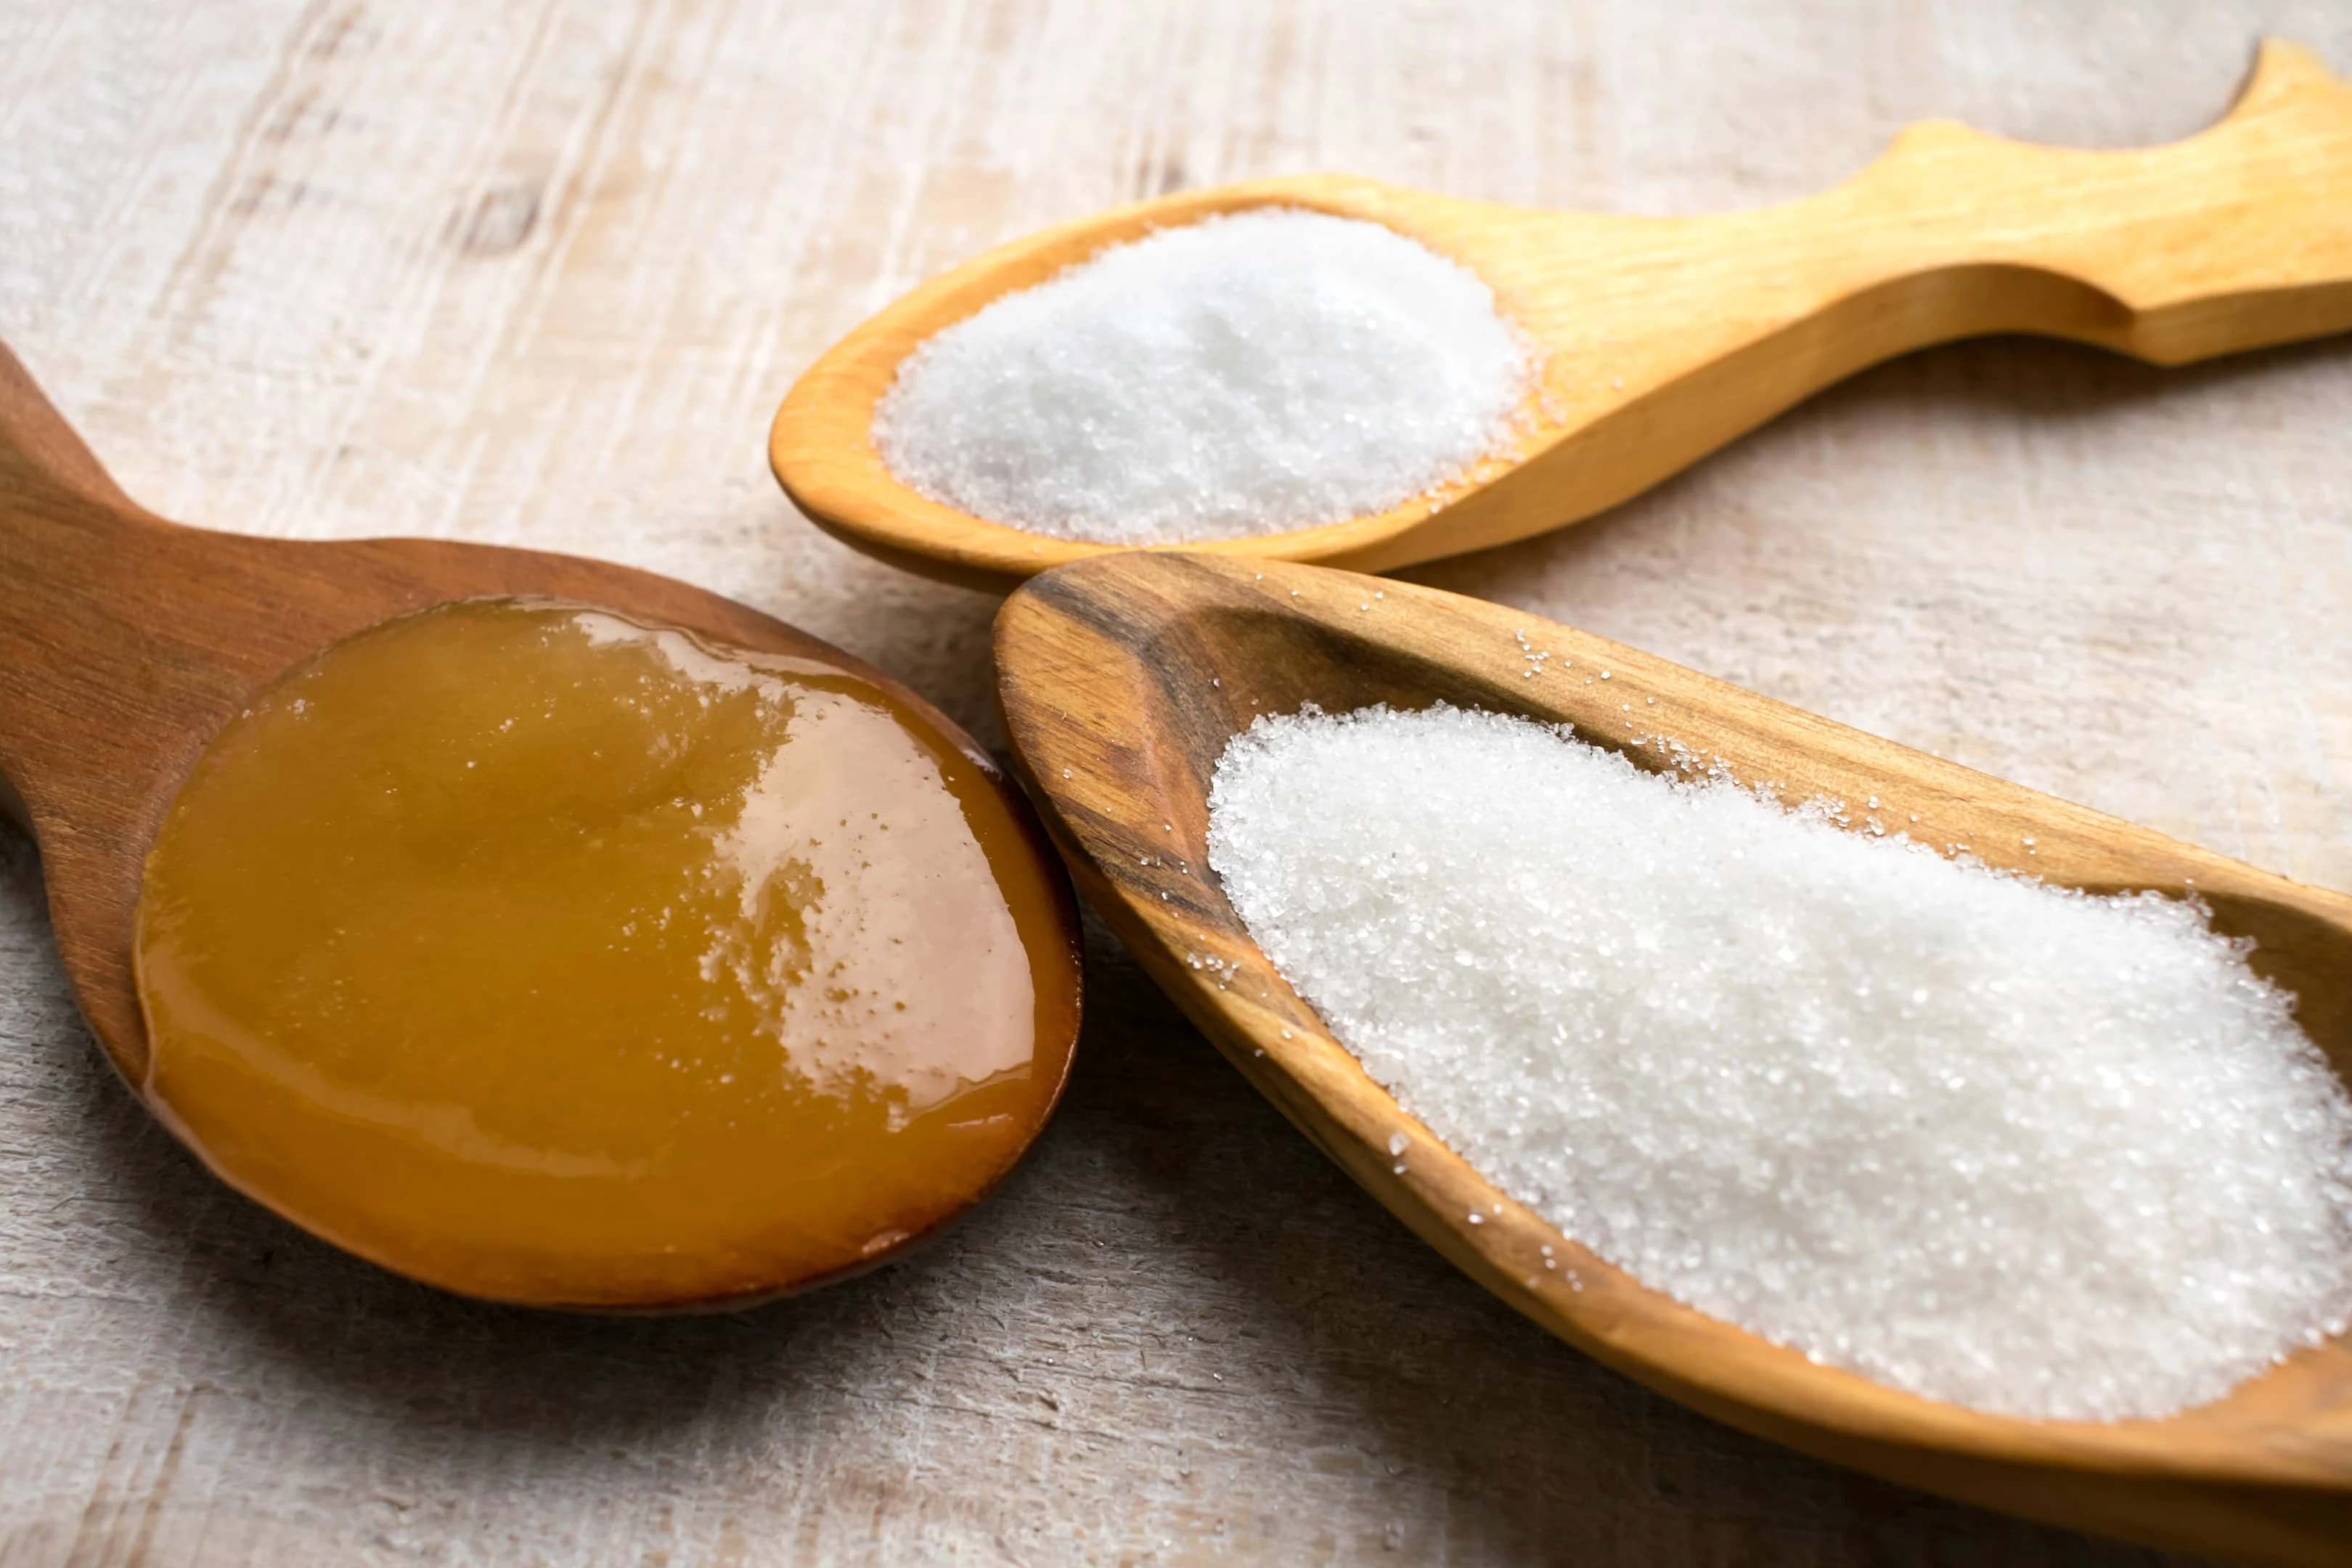 Artificial sweeteners and sugar substitutes in wooden spoons